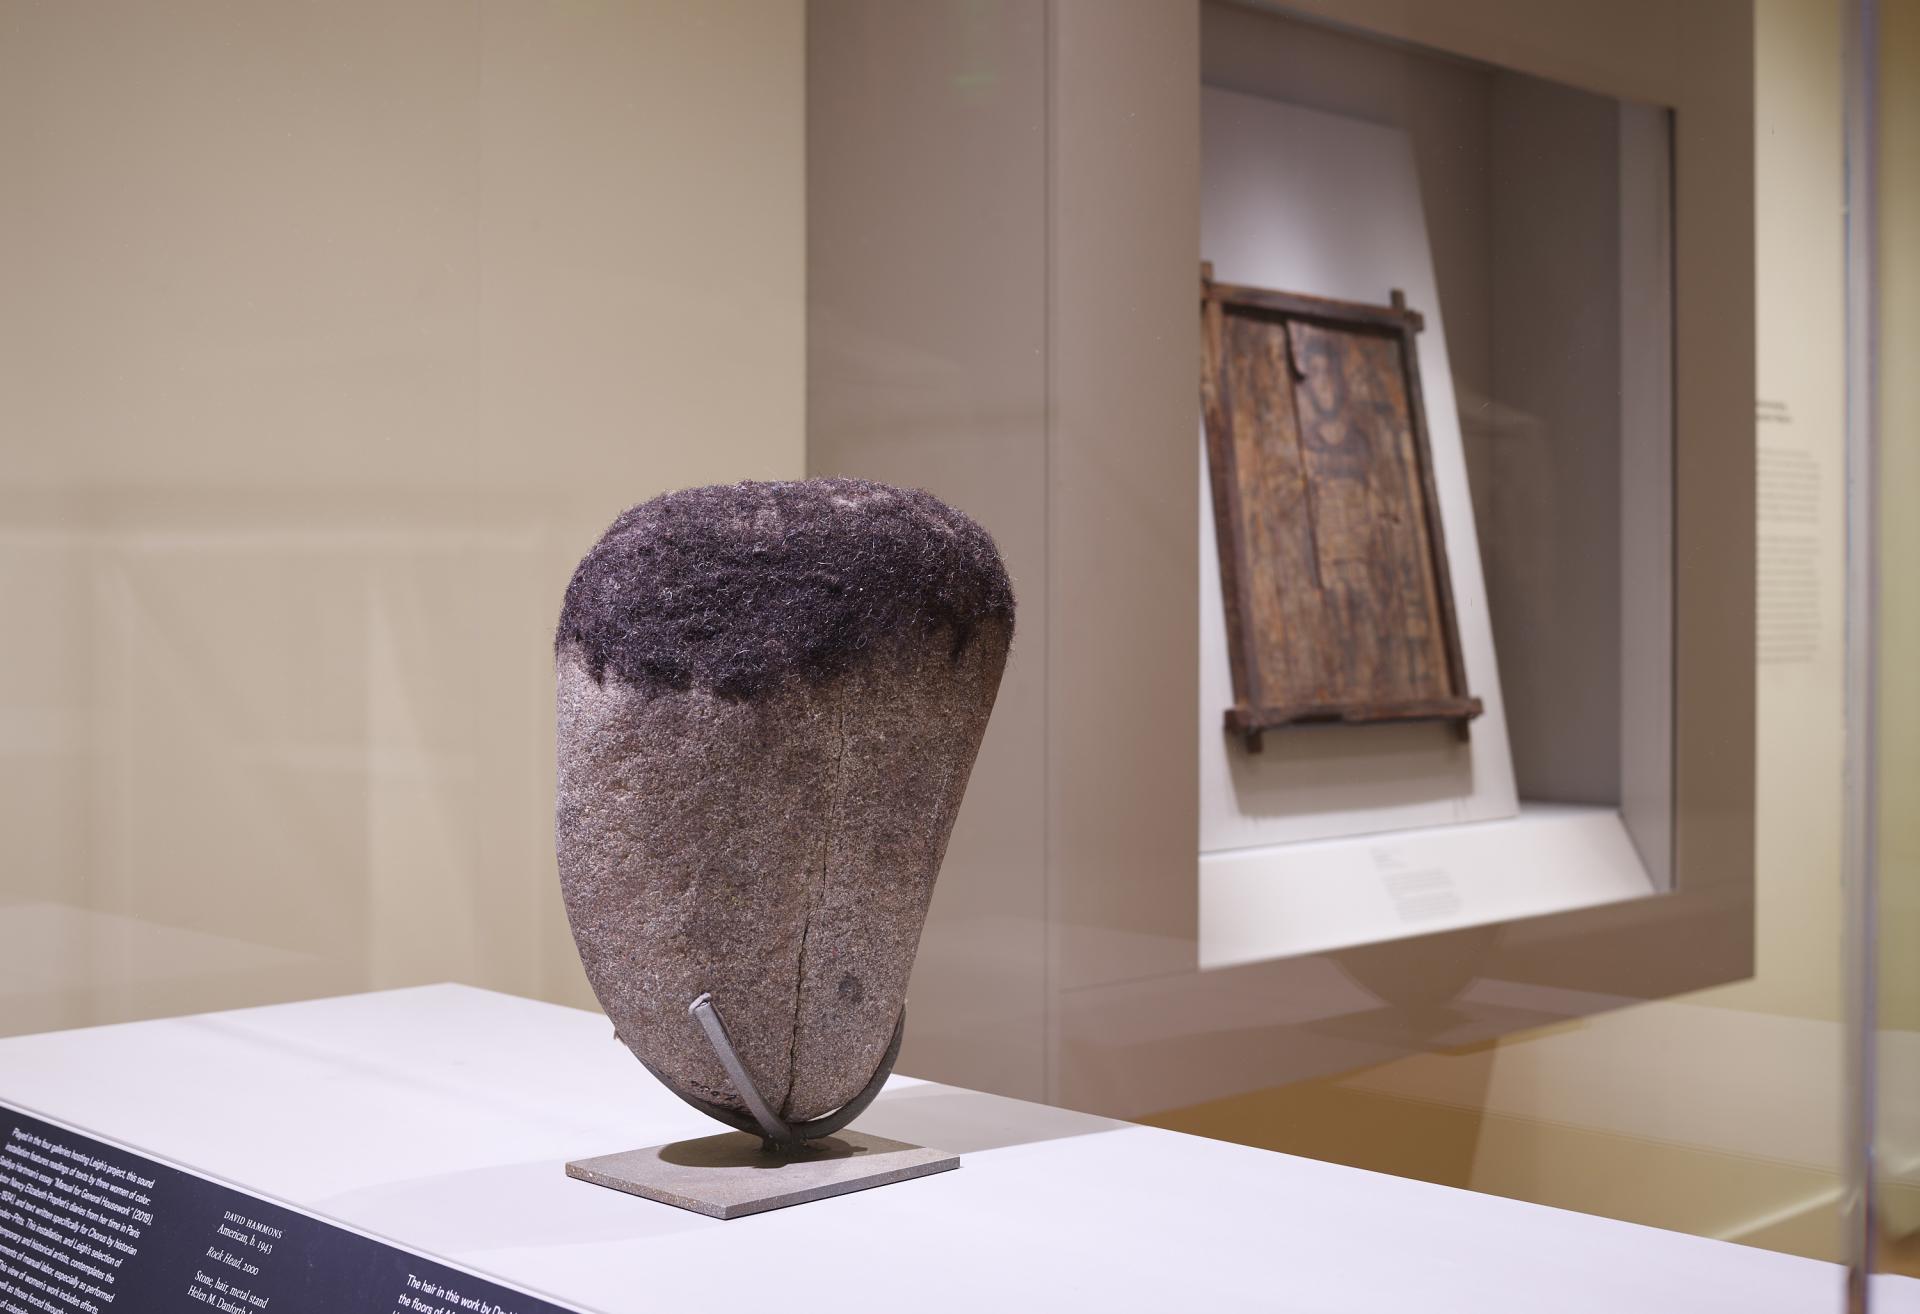 Installation shot of David Hammons "Rock Head" sculpture on view in the Egyptian gallery